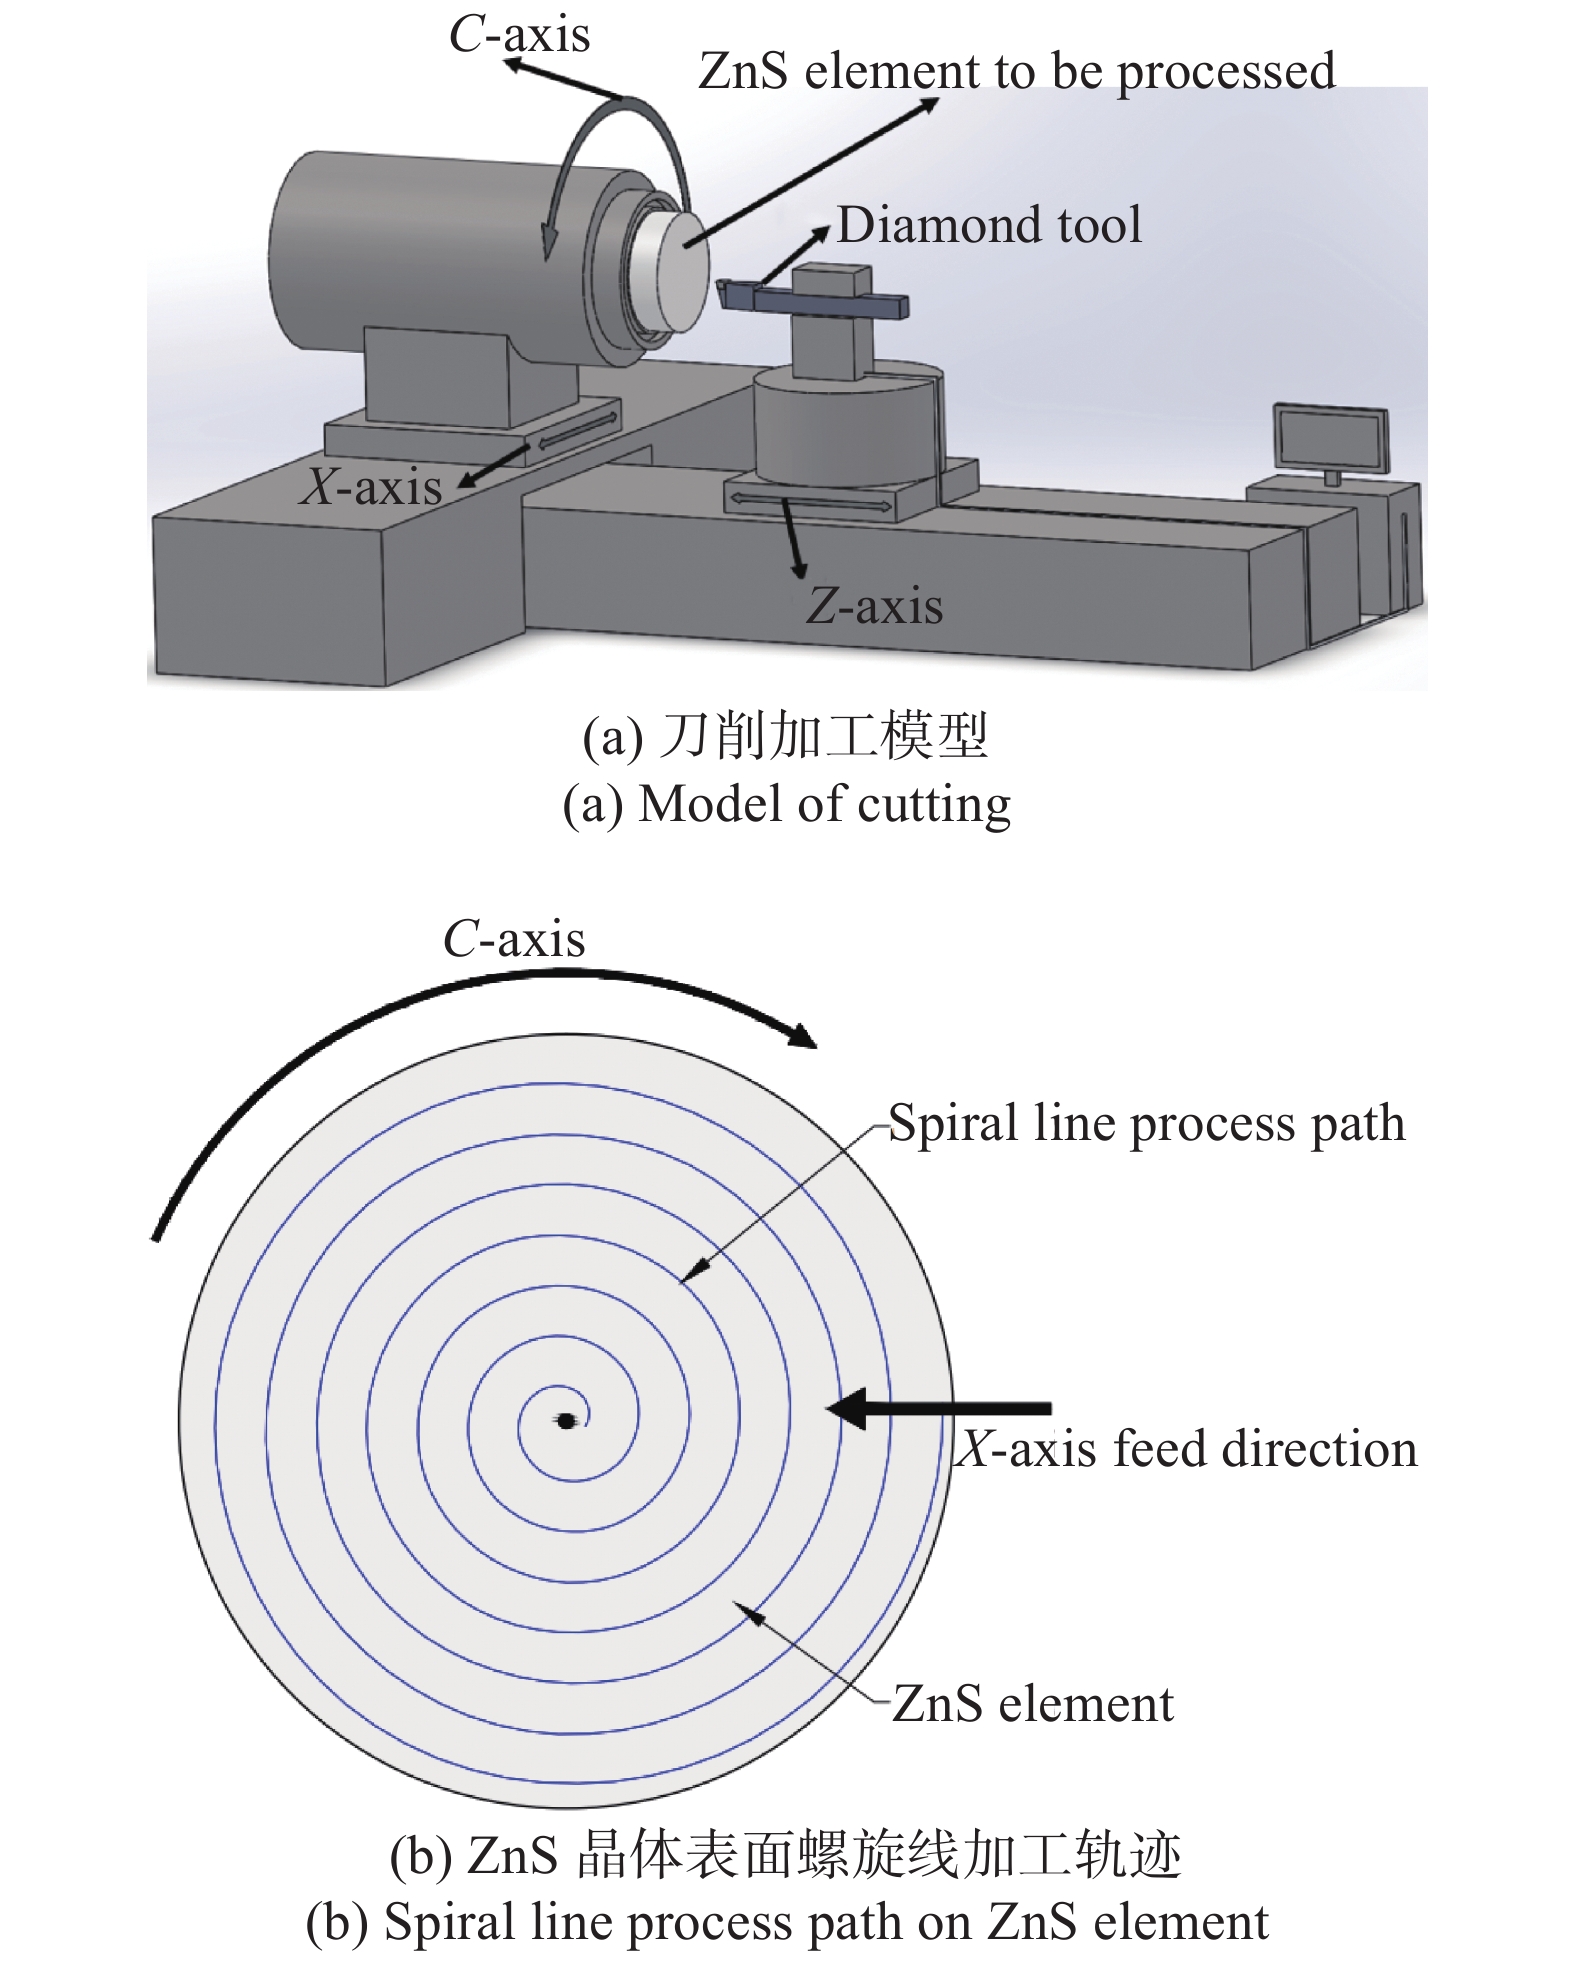 Schematic diagram of cutting and its spiral line process path